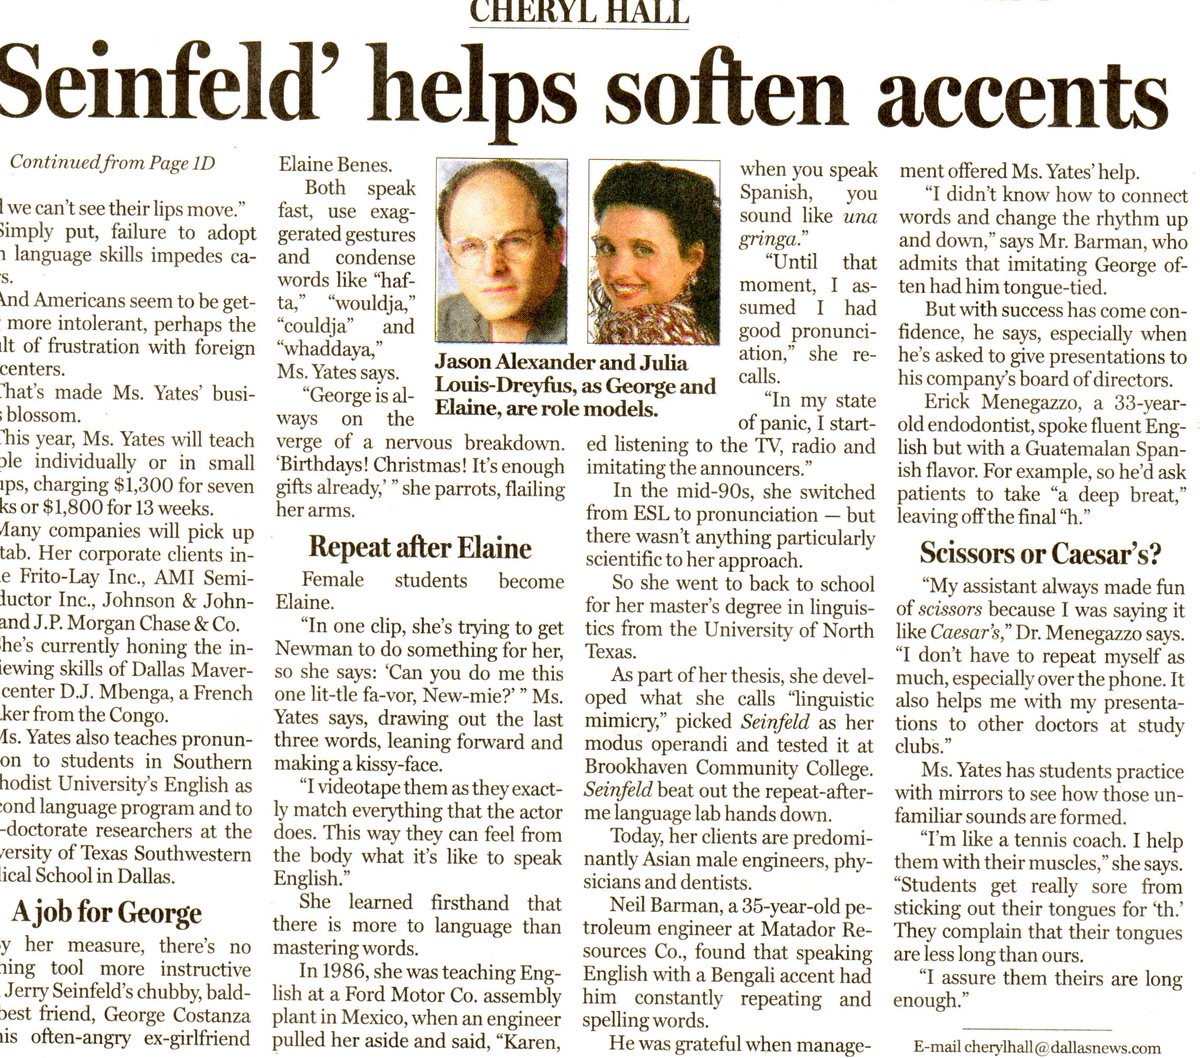 #ThrowbackThursday That time we got great press for our accent reduction client. Did you even know accent reduction was a 'thing?' #wedidnt #Dallasnews #accentreduction #publicrelations #PR #innovativeclients #tellyourstory